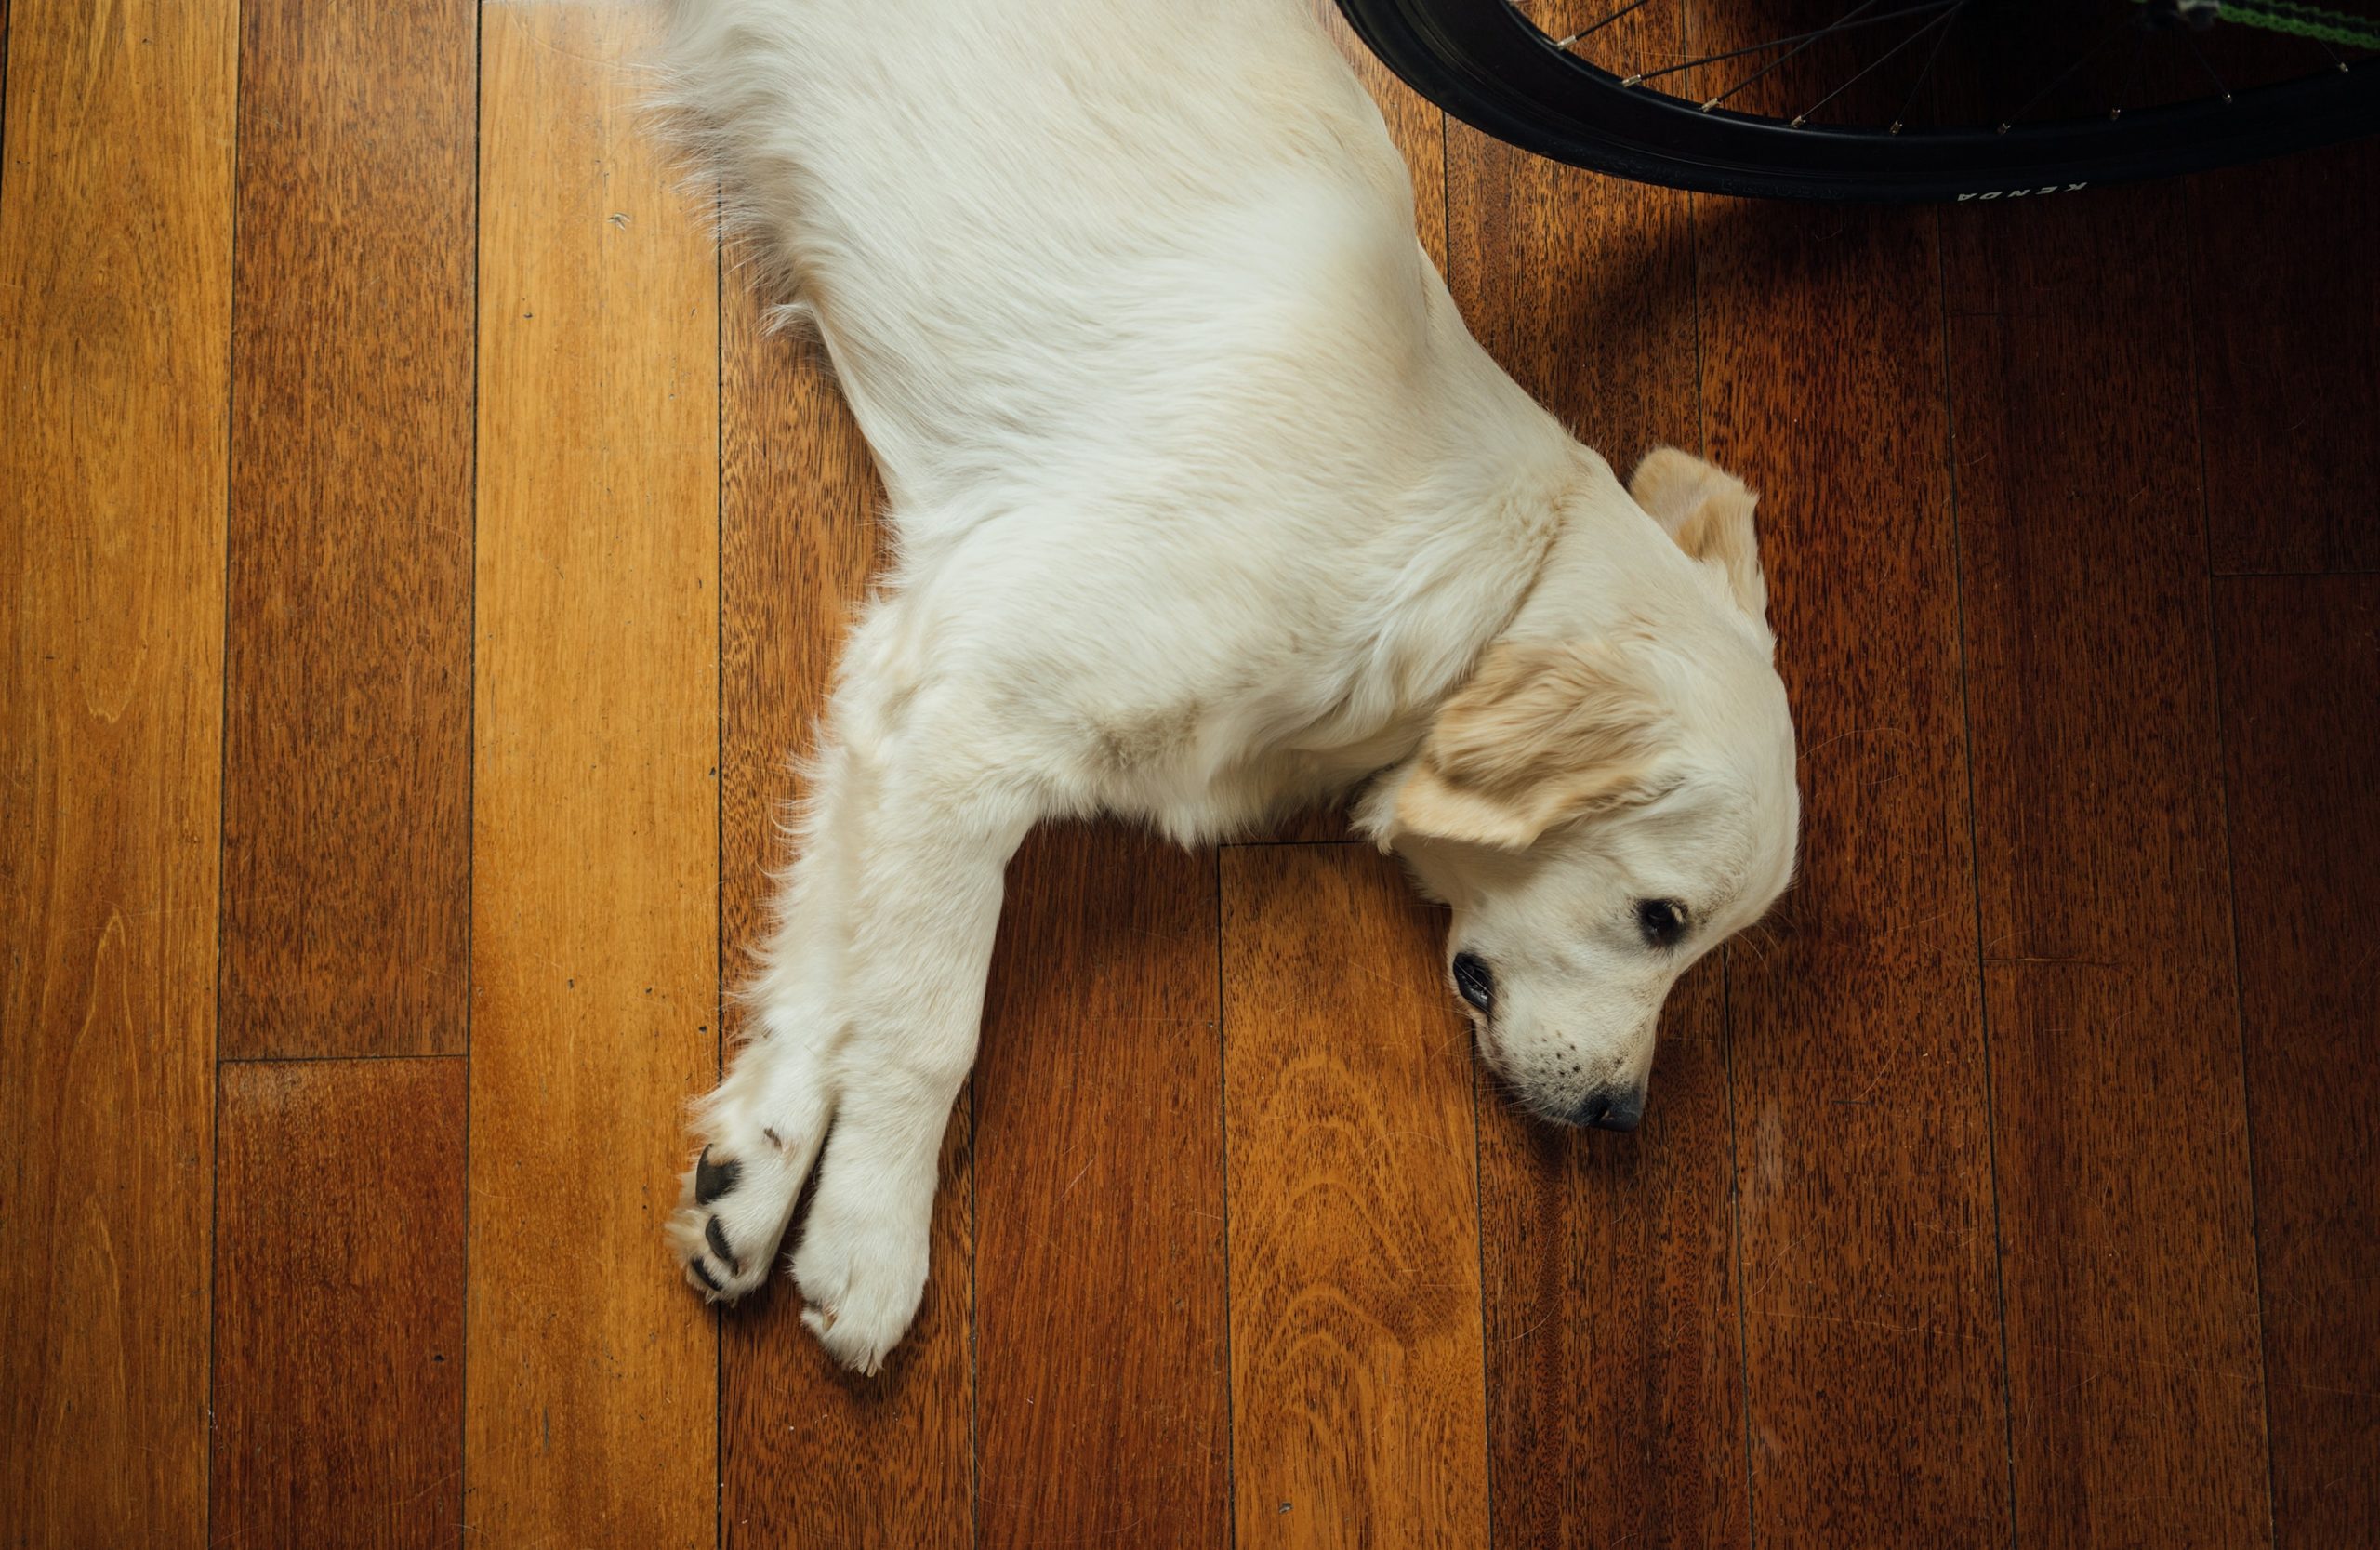 Best Wooden Floor For Cats And Dogs, Hardwood Floors Vs Laminate With A Dog